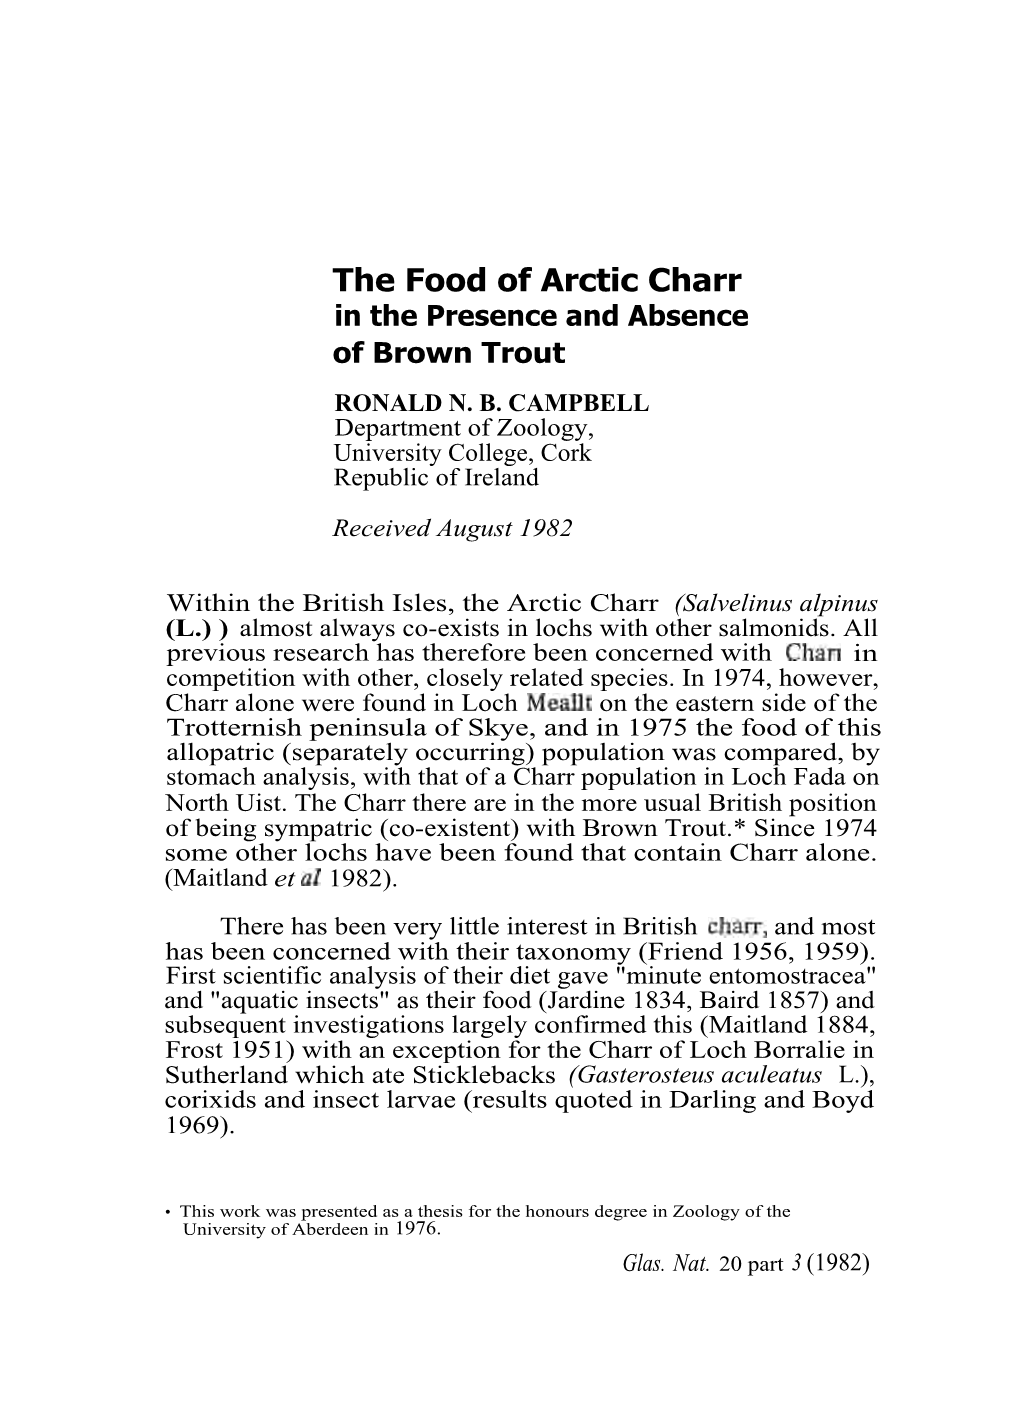 The Food of Arctic Charr in the Presence and Absence of Brown Trout RONALD N